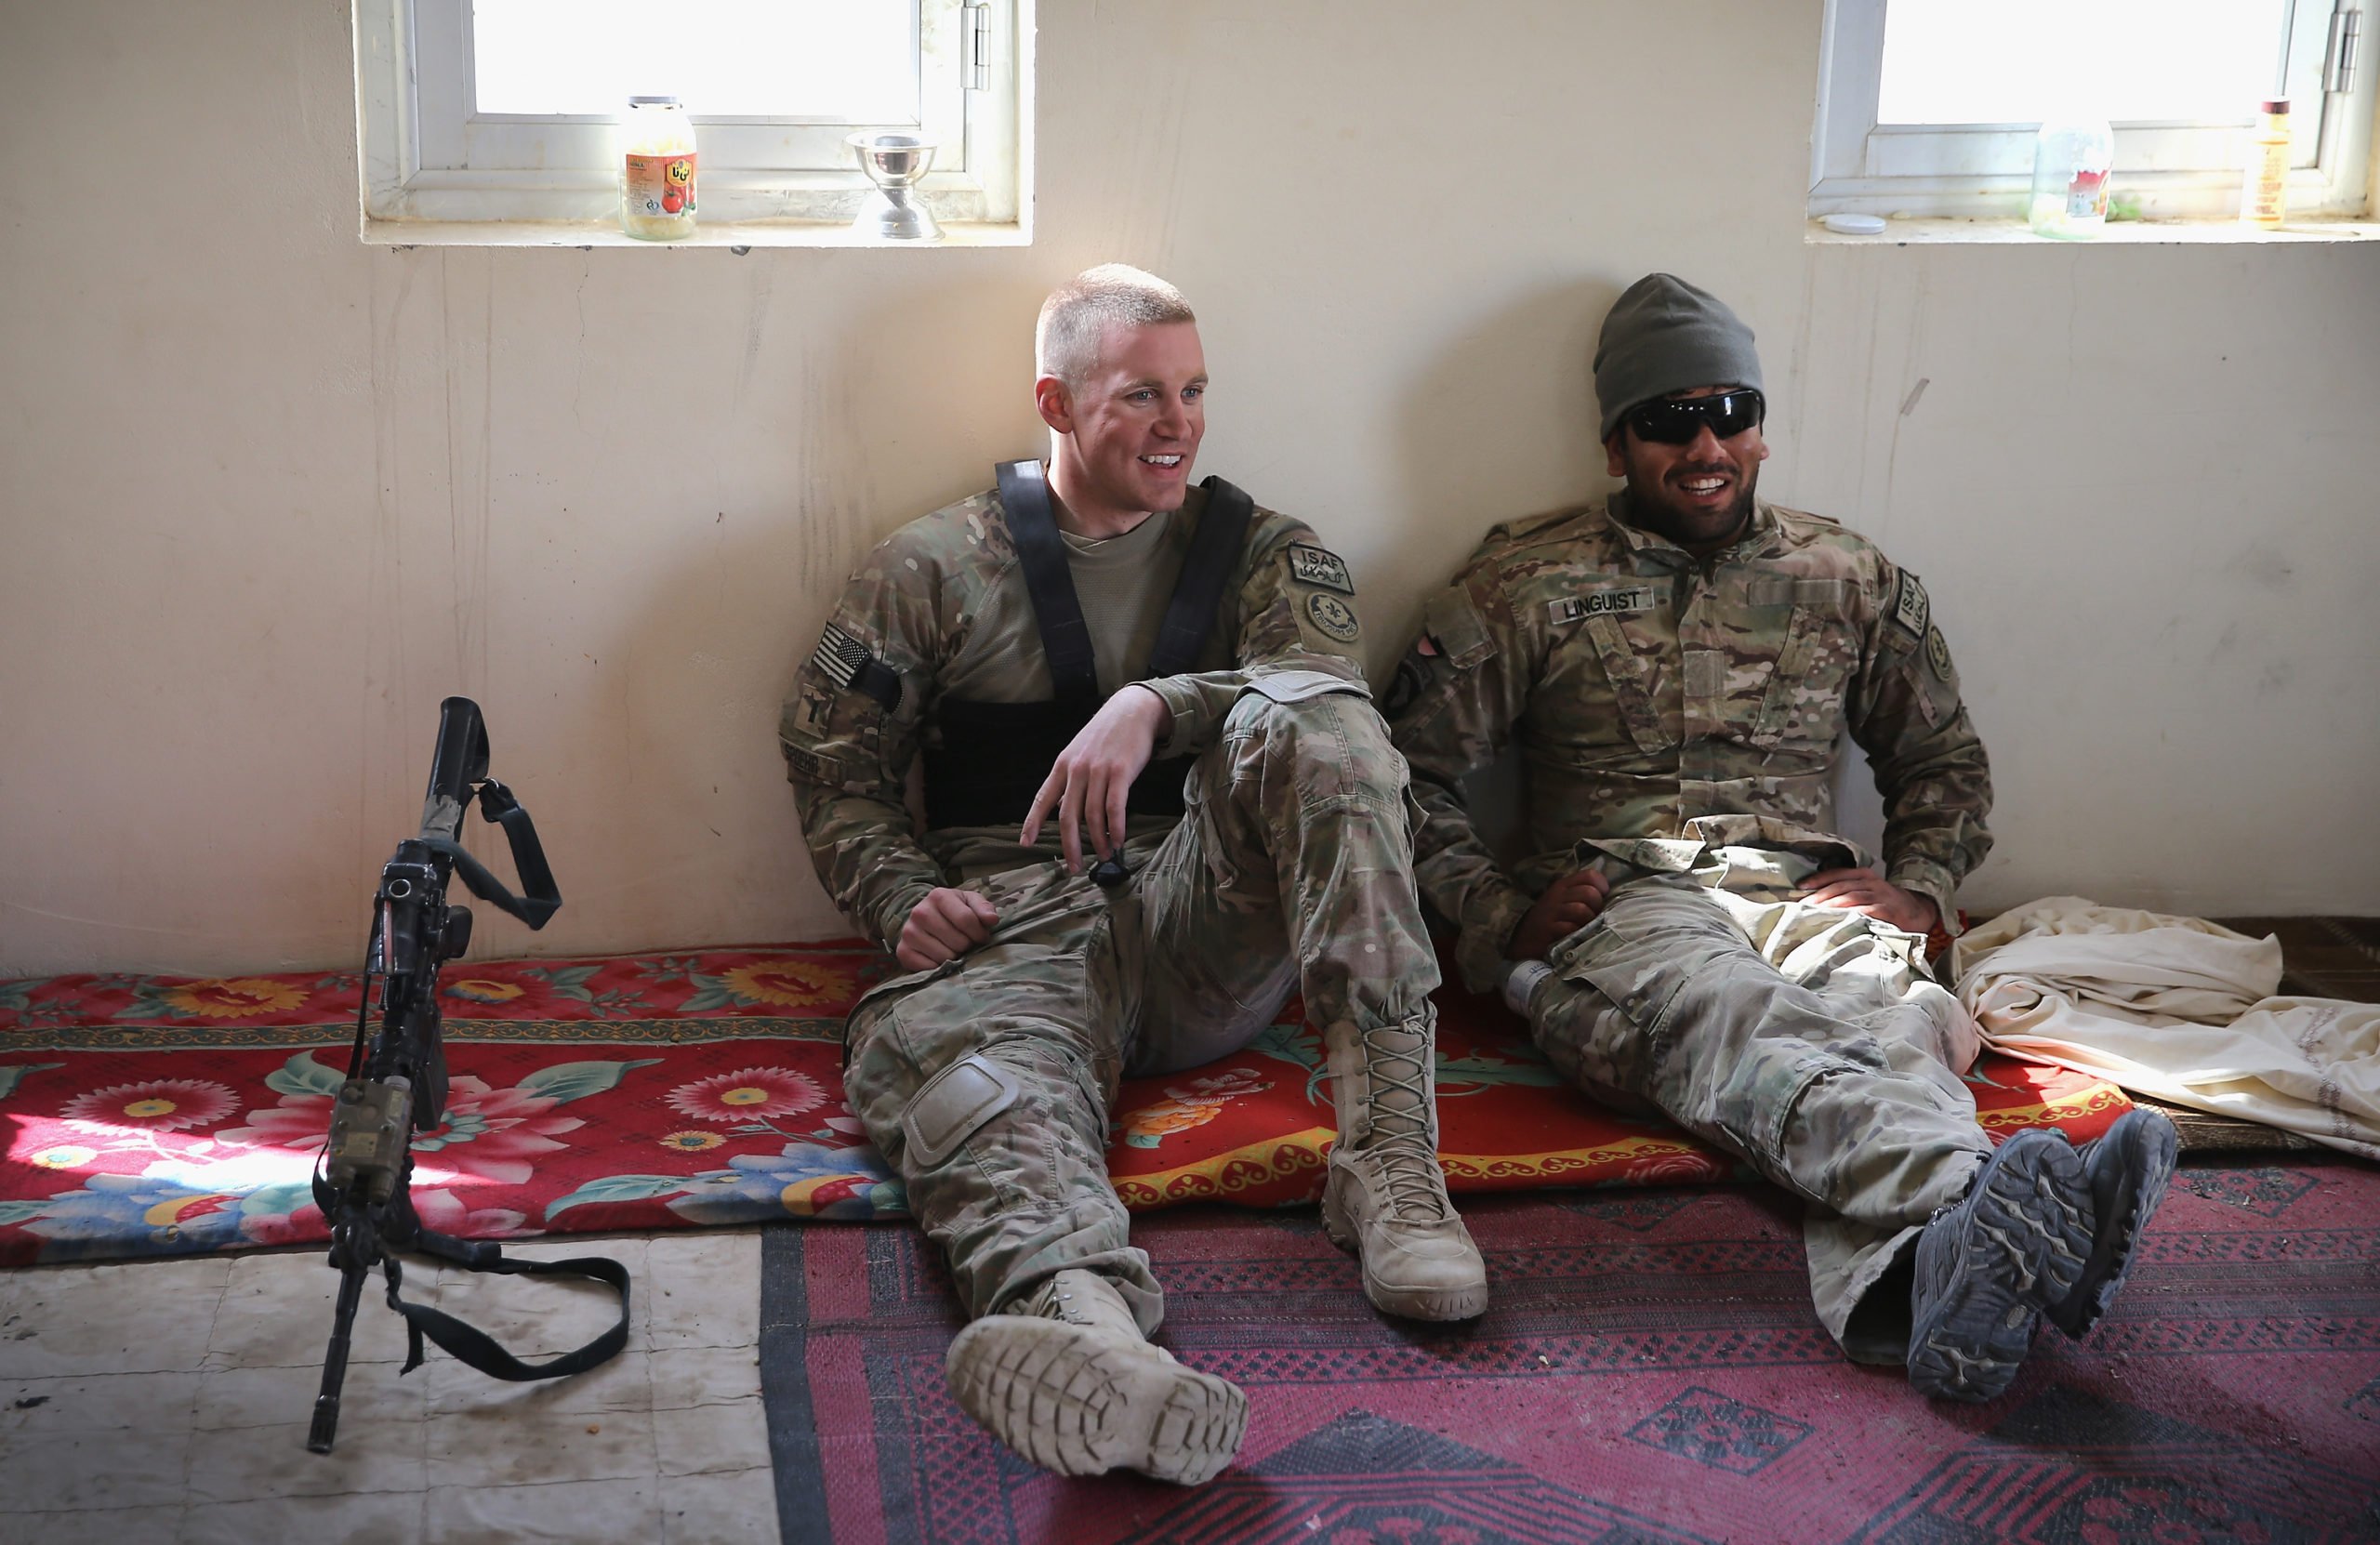 KANDAHAR, AFGHANISTAN - FEBRUARY 26: 1LT Peter Spoehr (L) from Alexandria, Virginia and his Afghan interpreter Wafa with the U.S. Army's 4th squadron 2d Cavalry Regiment wait to meet police at an Afghan National Police (ANP) outpost following a joint patrol of a village February 26, 2014 near Kandahar, Afghanistan. Defense Secretary Chuck Hagel announced he is making preparations for a complete military withdrawal from Afghanistan because Afghanistan President Hamid Karzai continues to refuse to sign the Bilateral Security Agreement. Fourth squadron 2d Cavalry Regiment is responsible for defending Kandahar Airfield against rocket attacks from insurgents. 